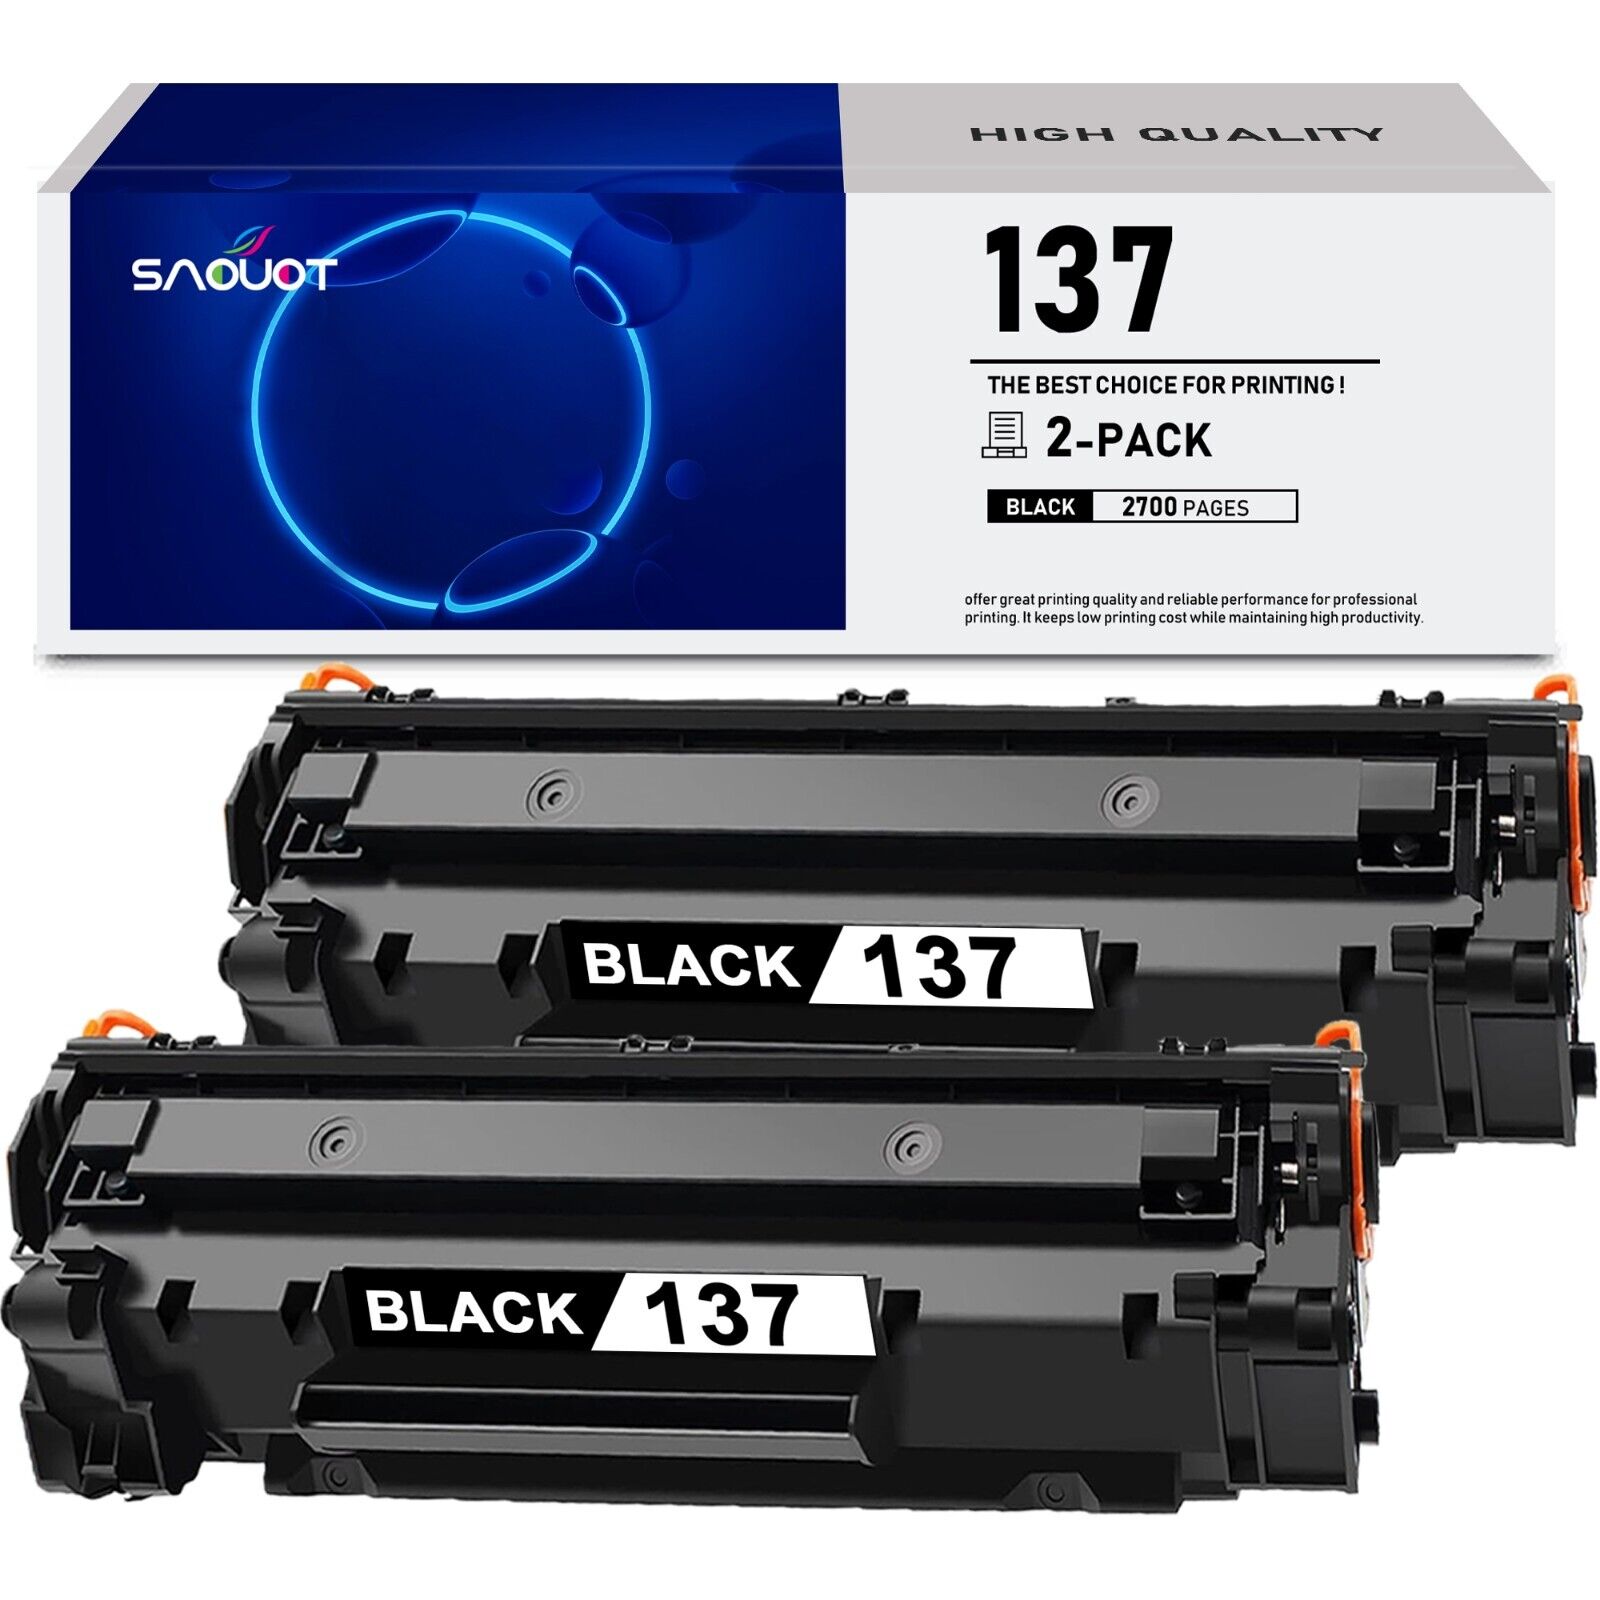 137 Toner Cartridge Replacement for Canon 137 ImageCLASS MF232w MF242dw MF236n